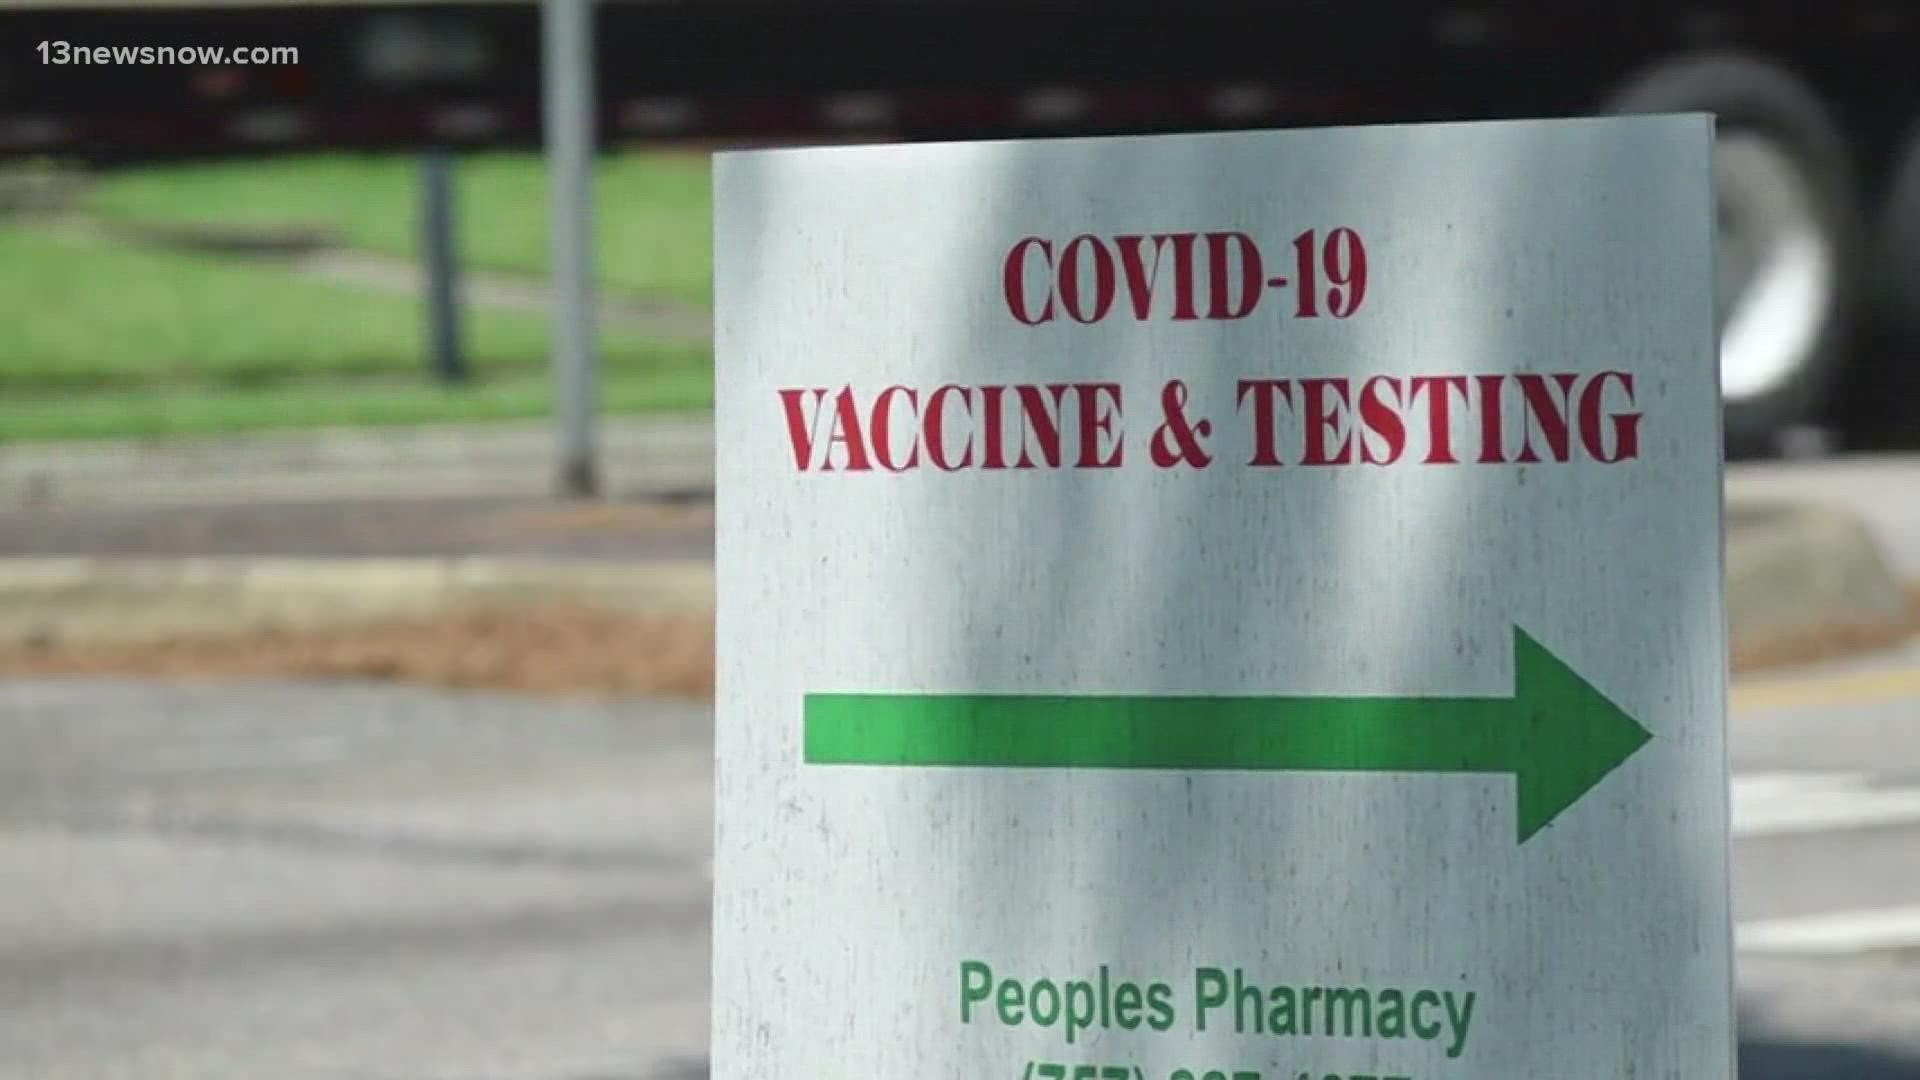 More and more people are looking to get tested for COVID-19 as the Delta variant makes its way through Hampton Roads.